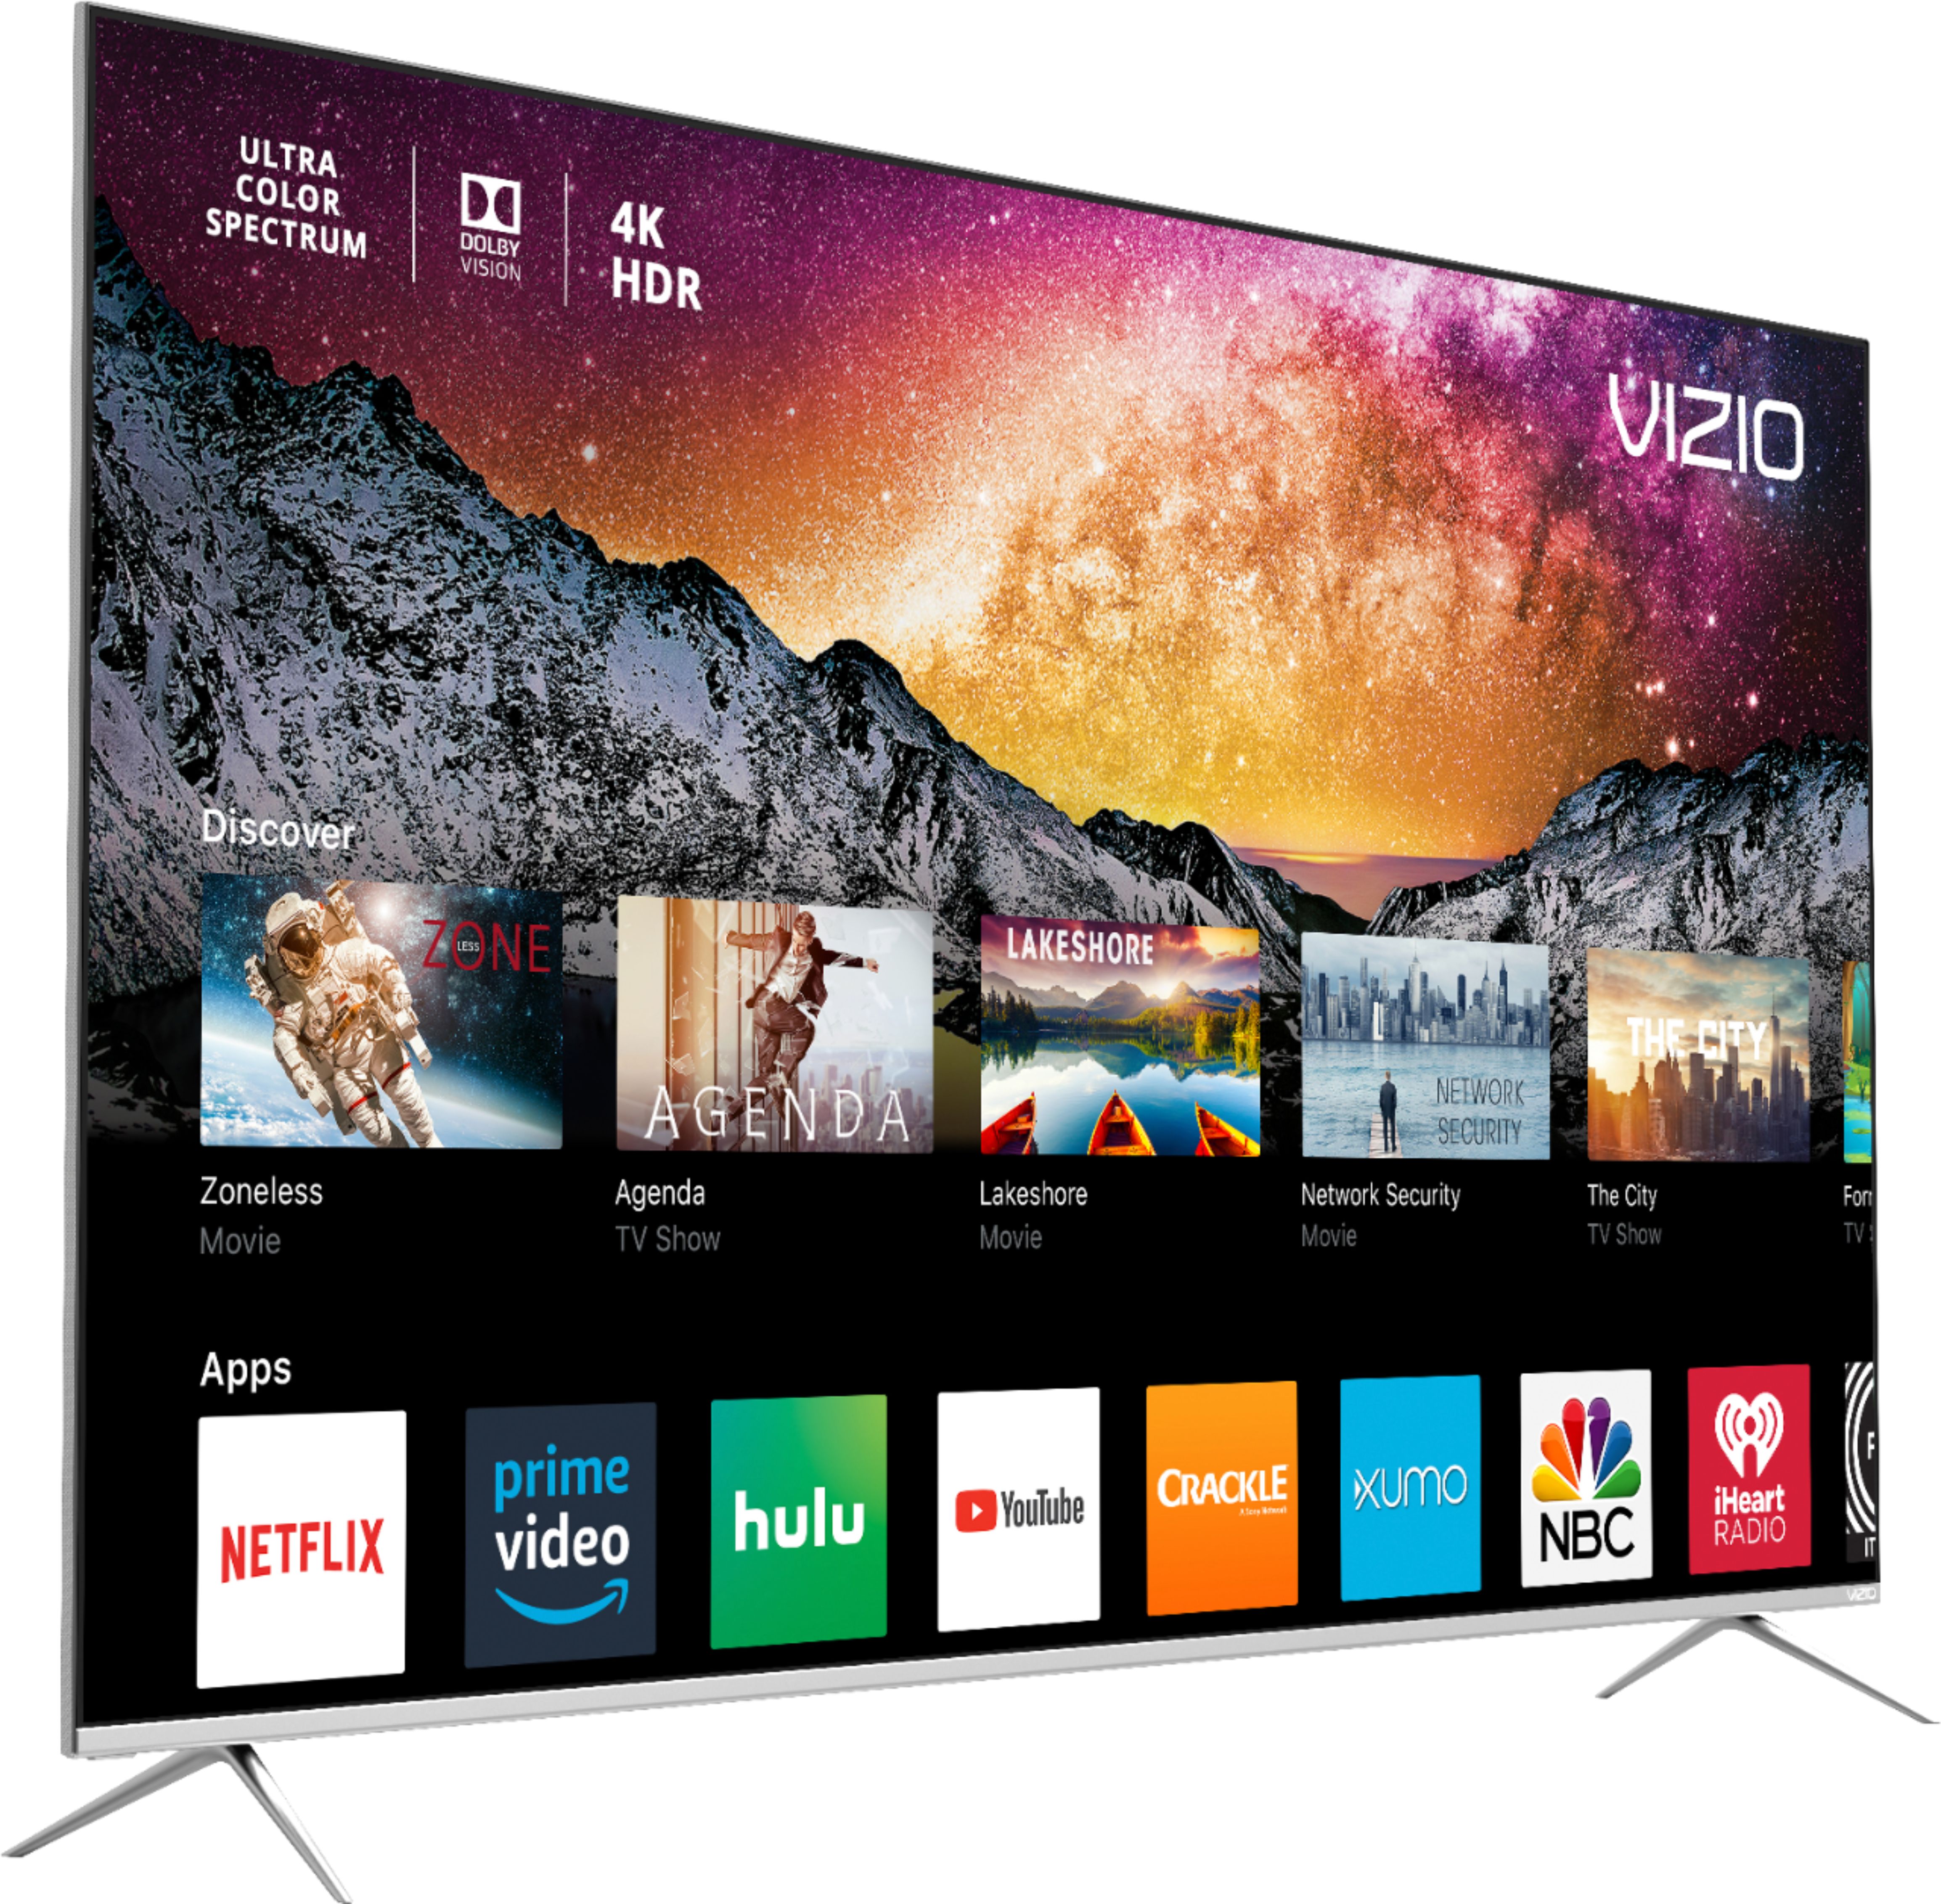 Best Buy Vizio 65 Class Led P Series 2160p Smart 4k Uhd Tv With Hdr